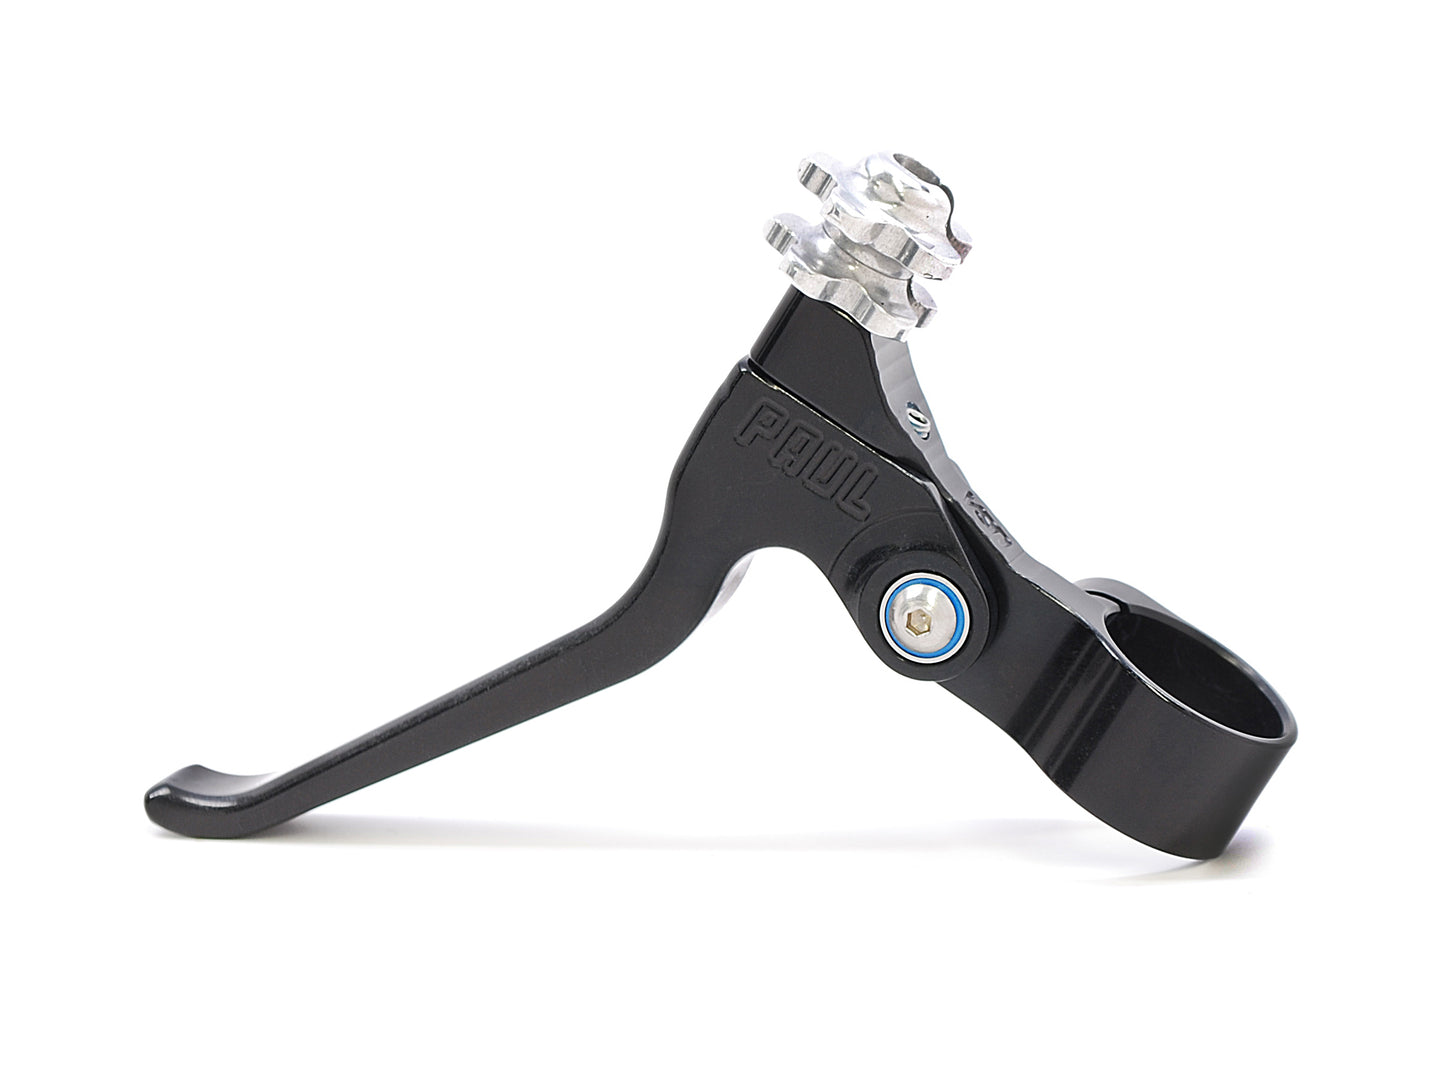 Brake Levers - Mountain - Short pull - Paul Canti Lever